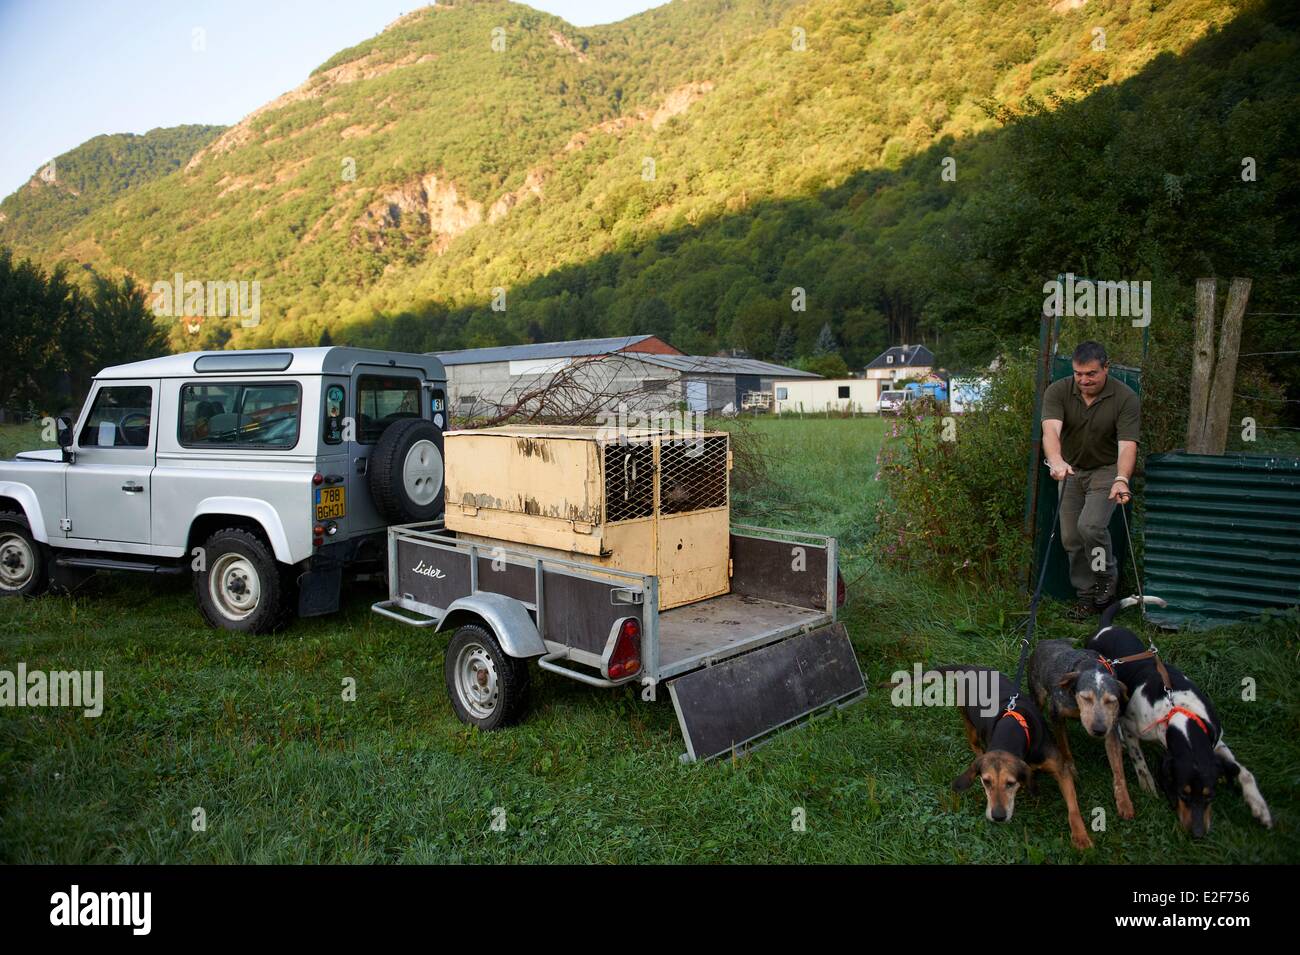 France, Haute Garonne (31), Central Pyrenees, Cazaux Layrisse, Boar hunting, Hunter leads dogs in the cage of the trailers Stock Photo